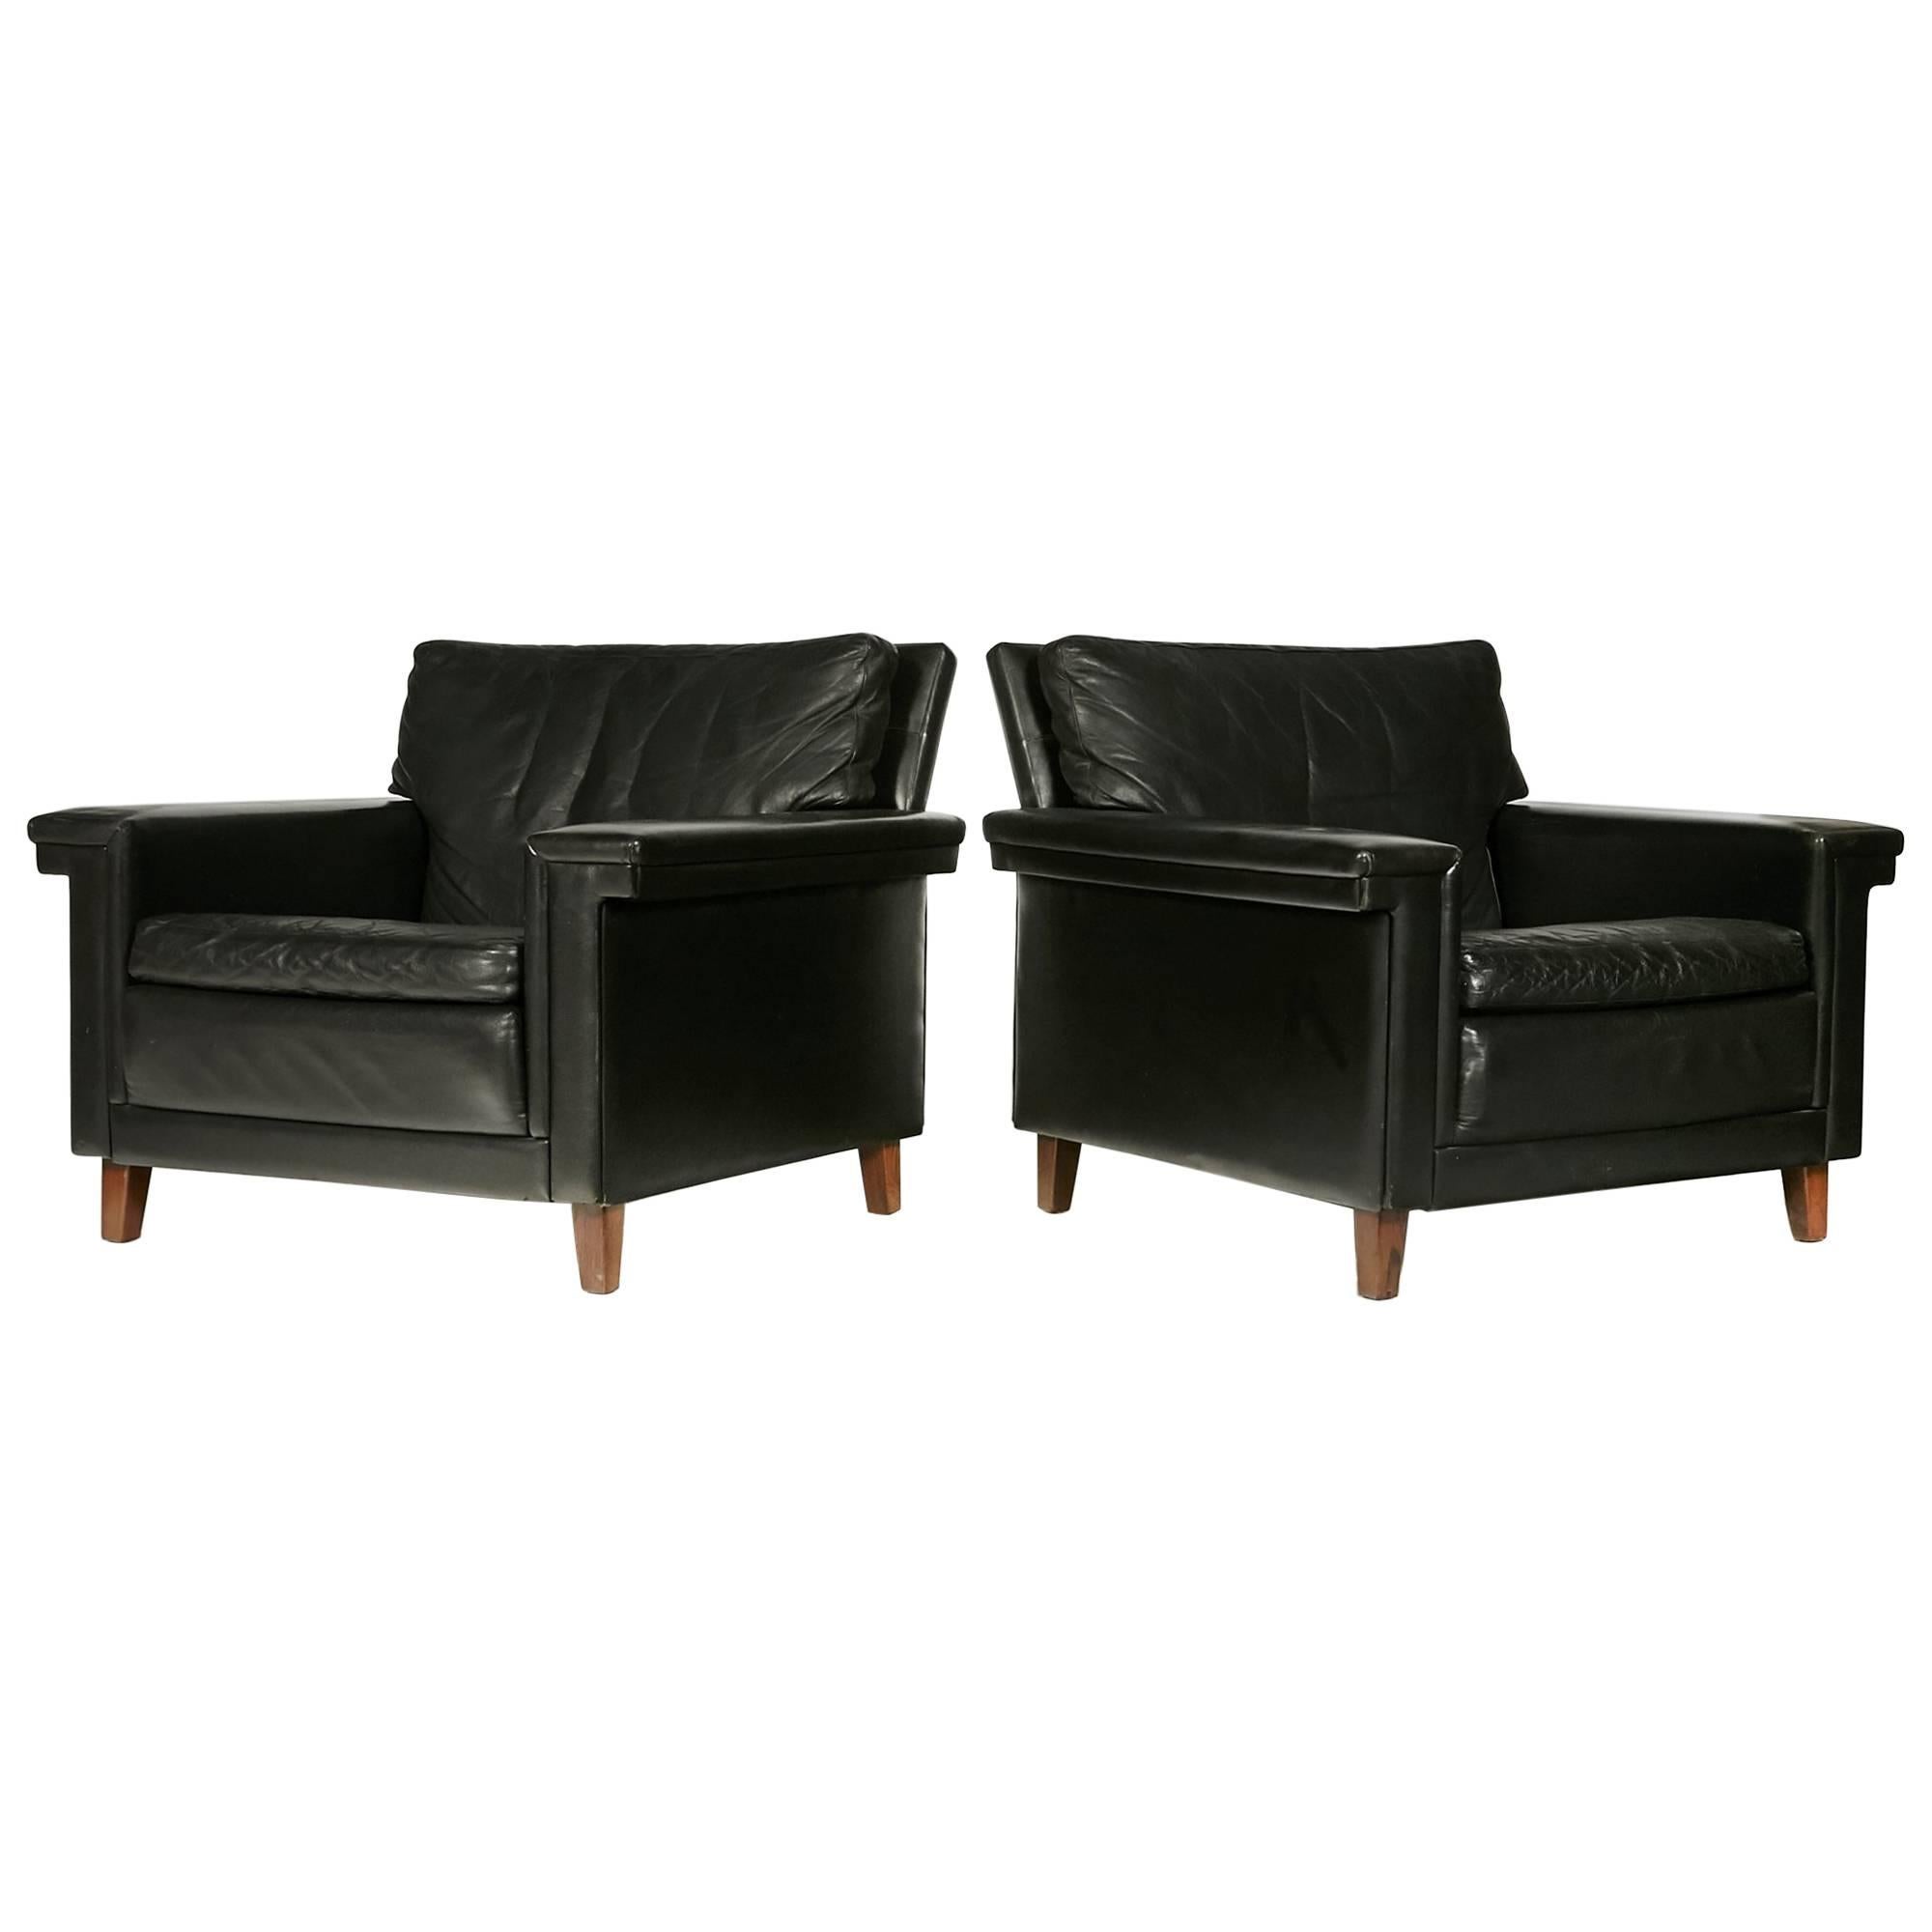 1960s Pair of Black Leather Lounge Chairs, Denmark For Sale